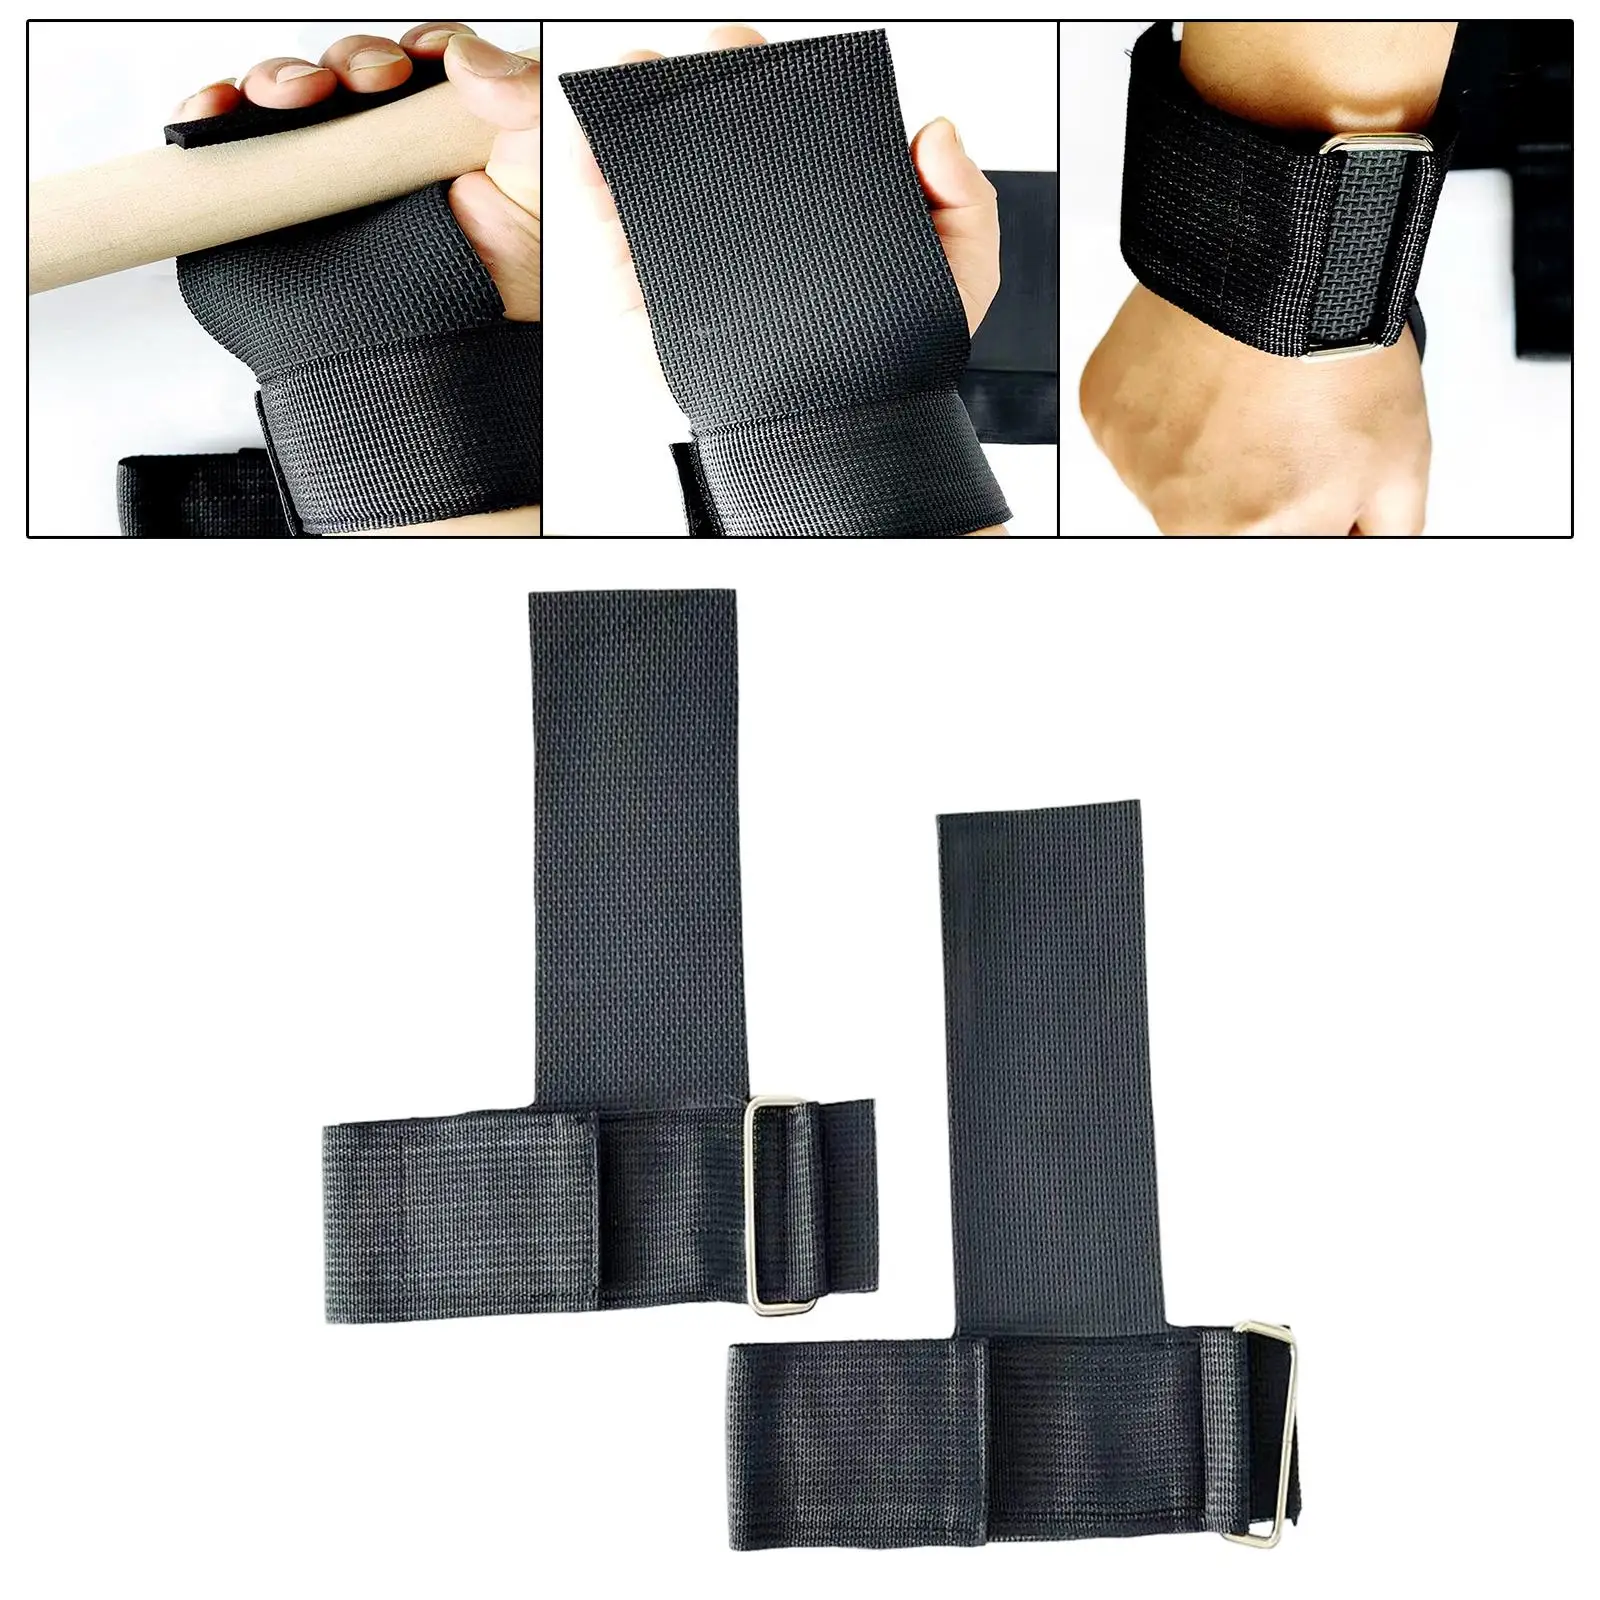 2Pcs Weight Lifting Straps Wristband Wear Resistant Palm Protection Anti Friction for Bench Press Strength Training Workout Gym